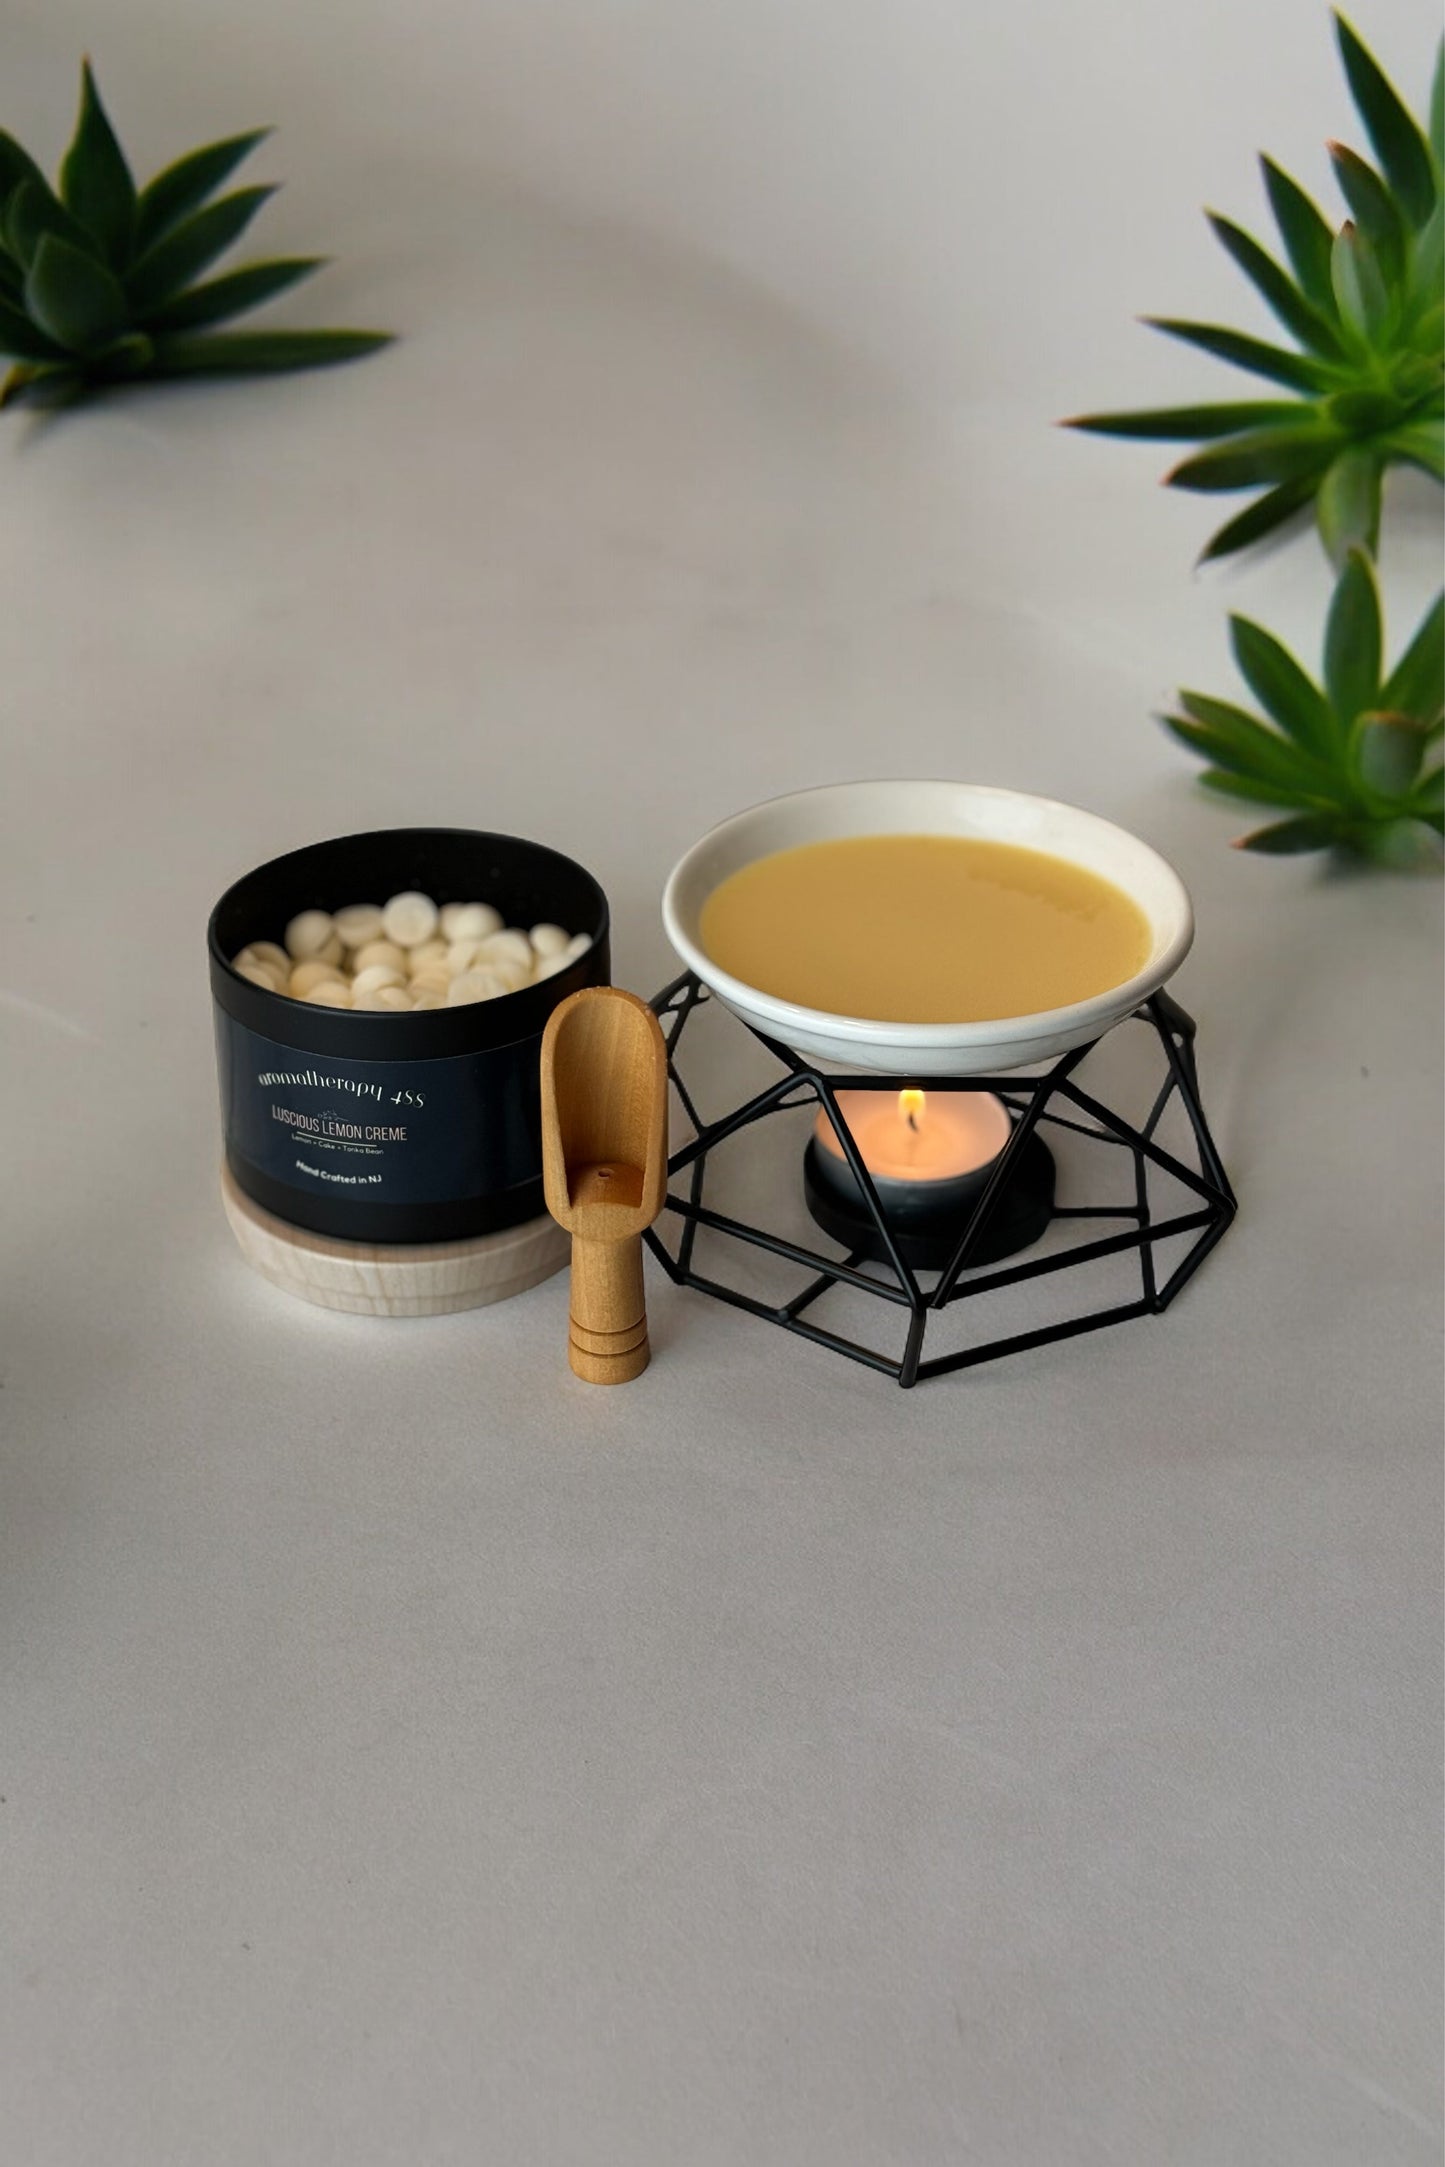 Black Diamond-Shaped | Aromatherapy | Stove | Essential Oil Lamp | Tea light Holder | Wax Melts Warmer | Diffuser for Home Decor